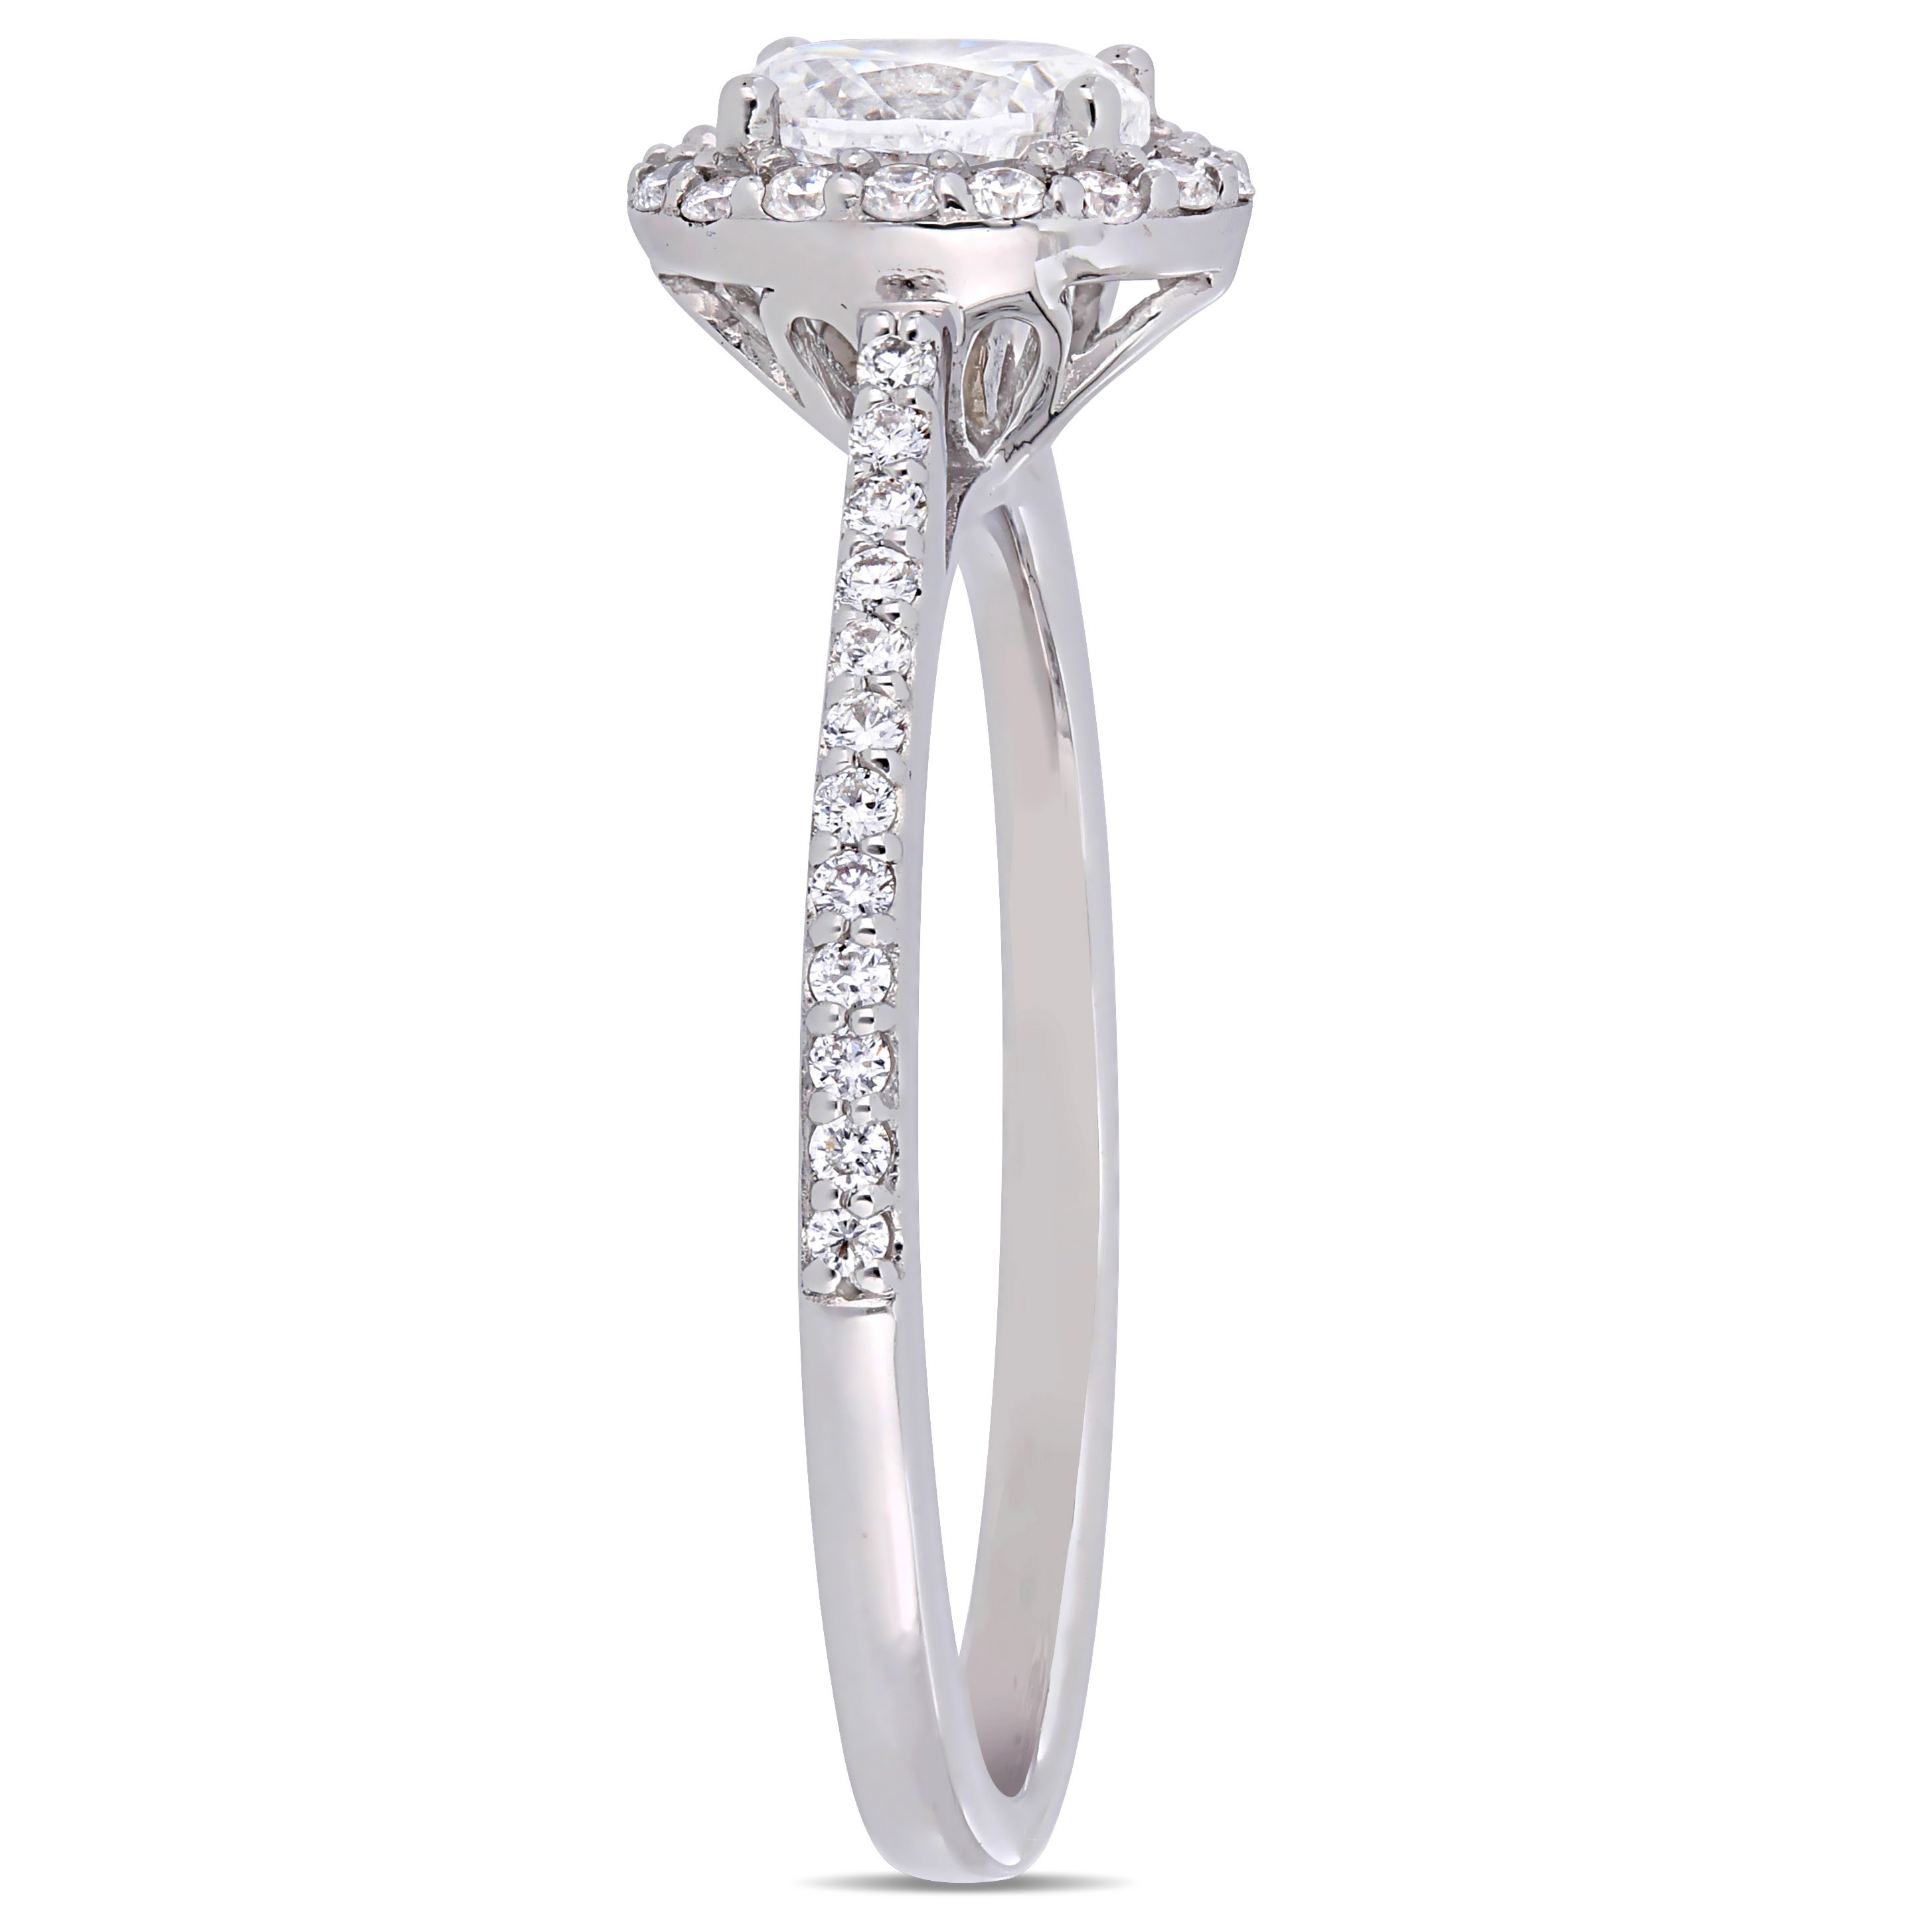 3/4 CT TW Diamond Halo Engagement Ring in 14k White Gold